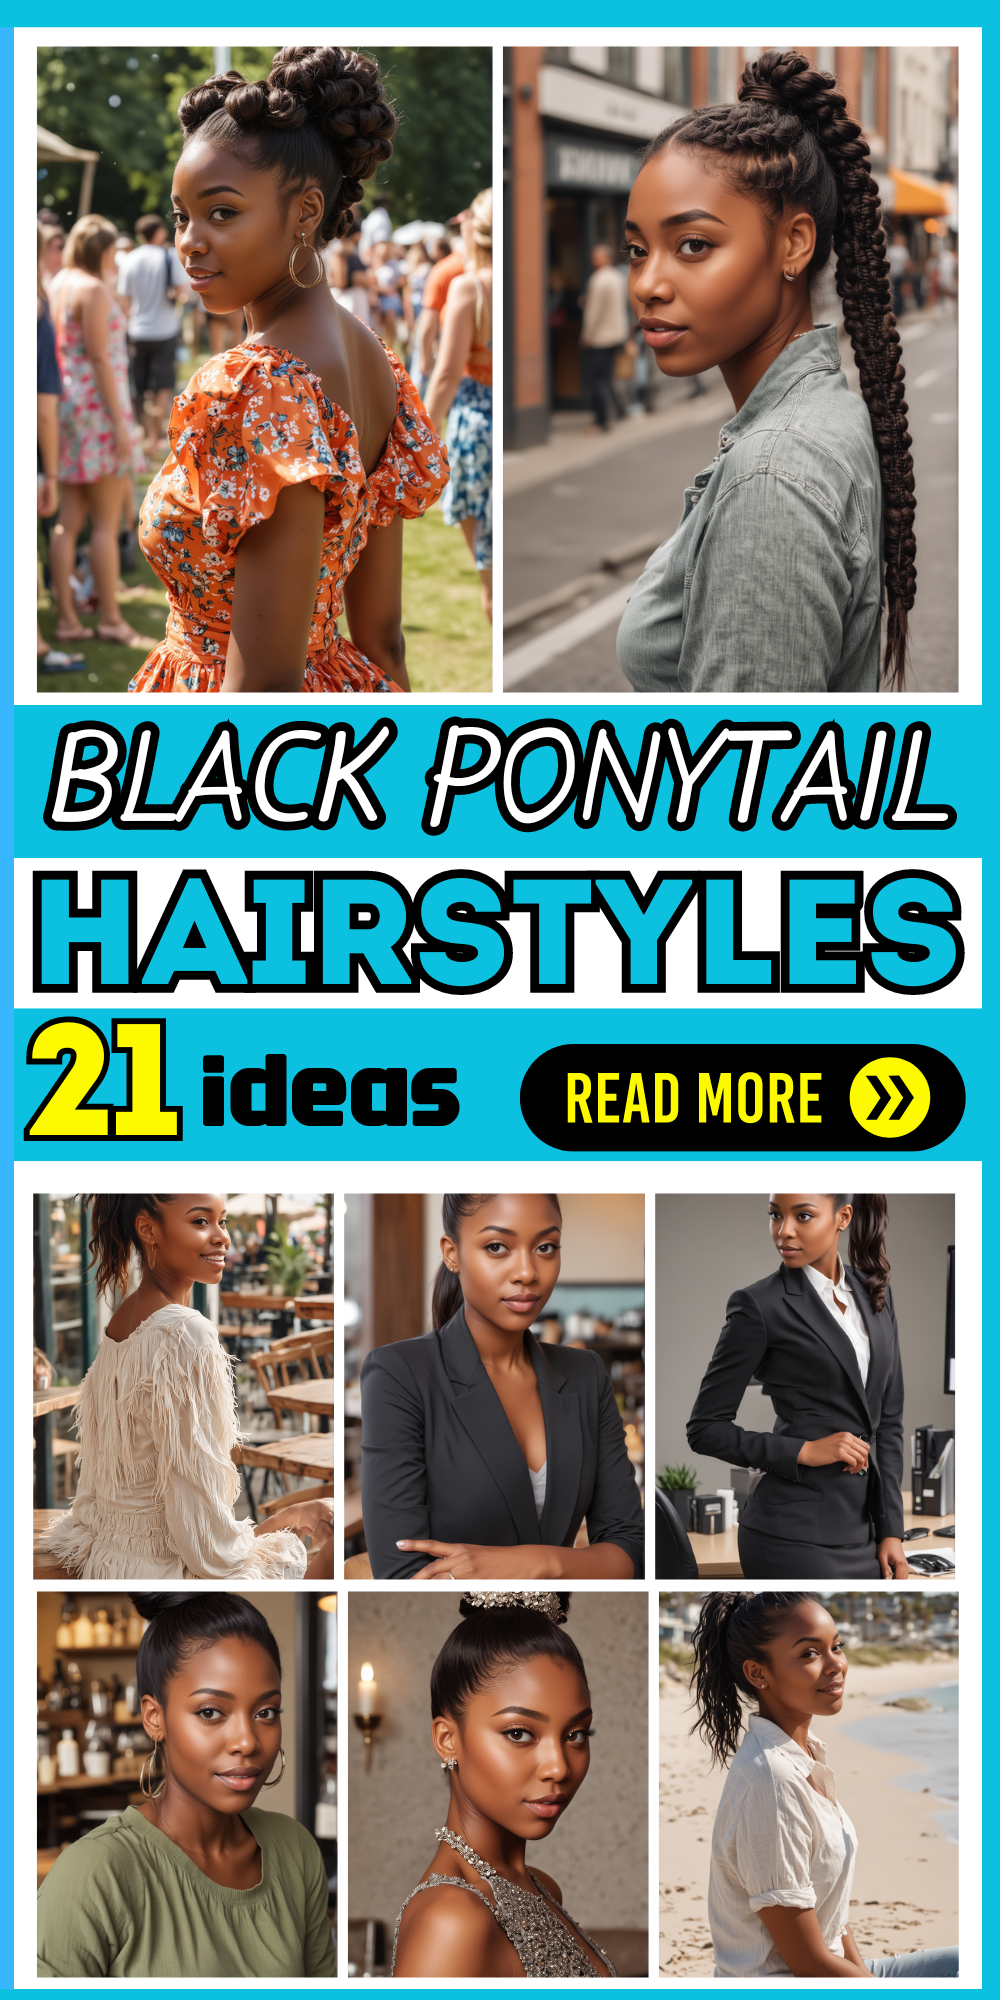 21 Weave Black Ponytail Hairstyles: Styles for Every Face Shape & Occasion